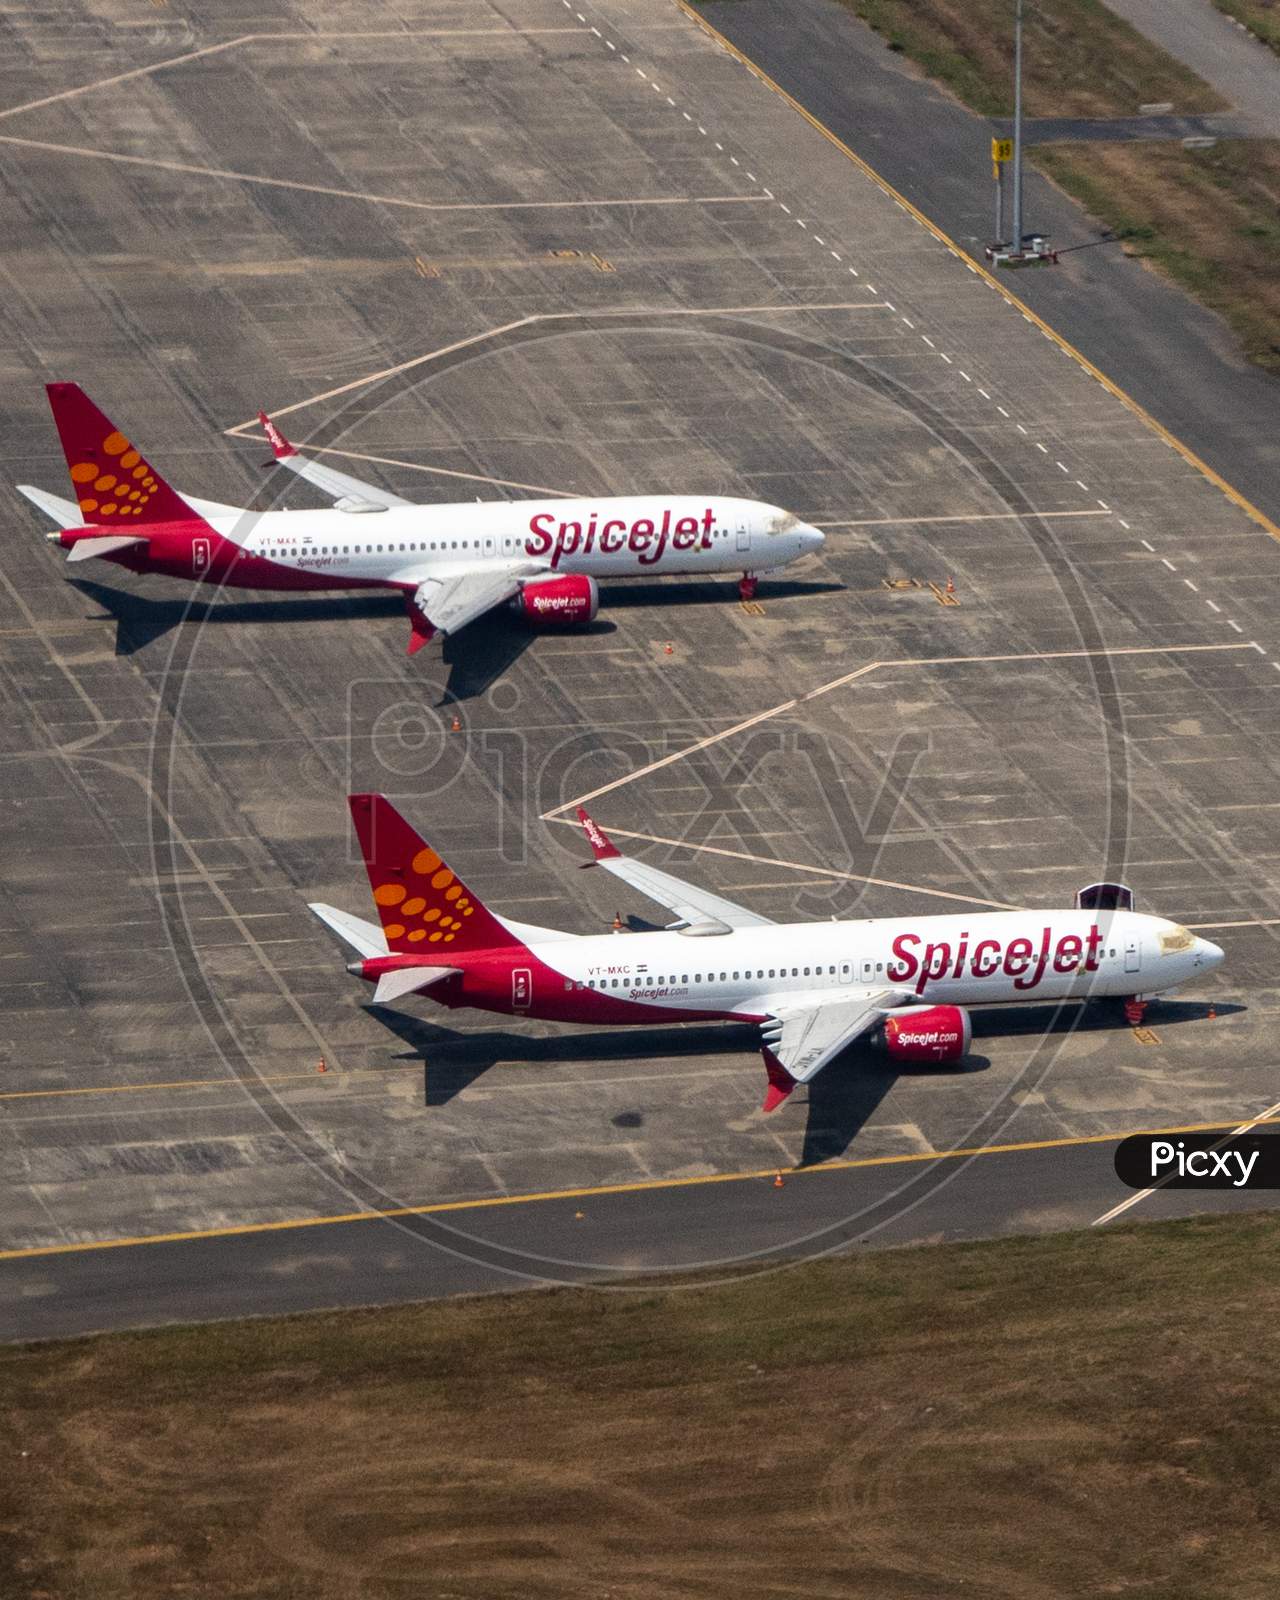 Spicejet Flights  Stranded In an Airport